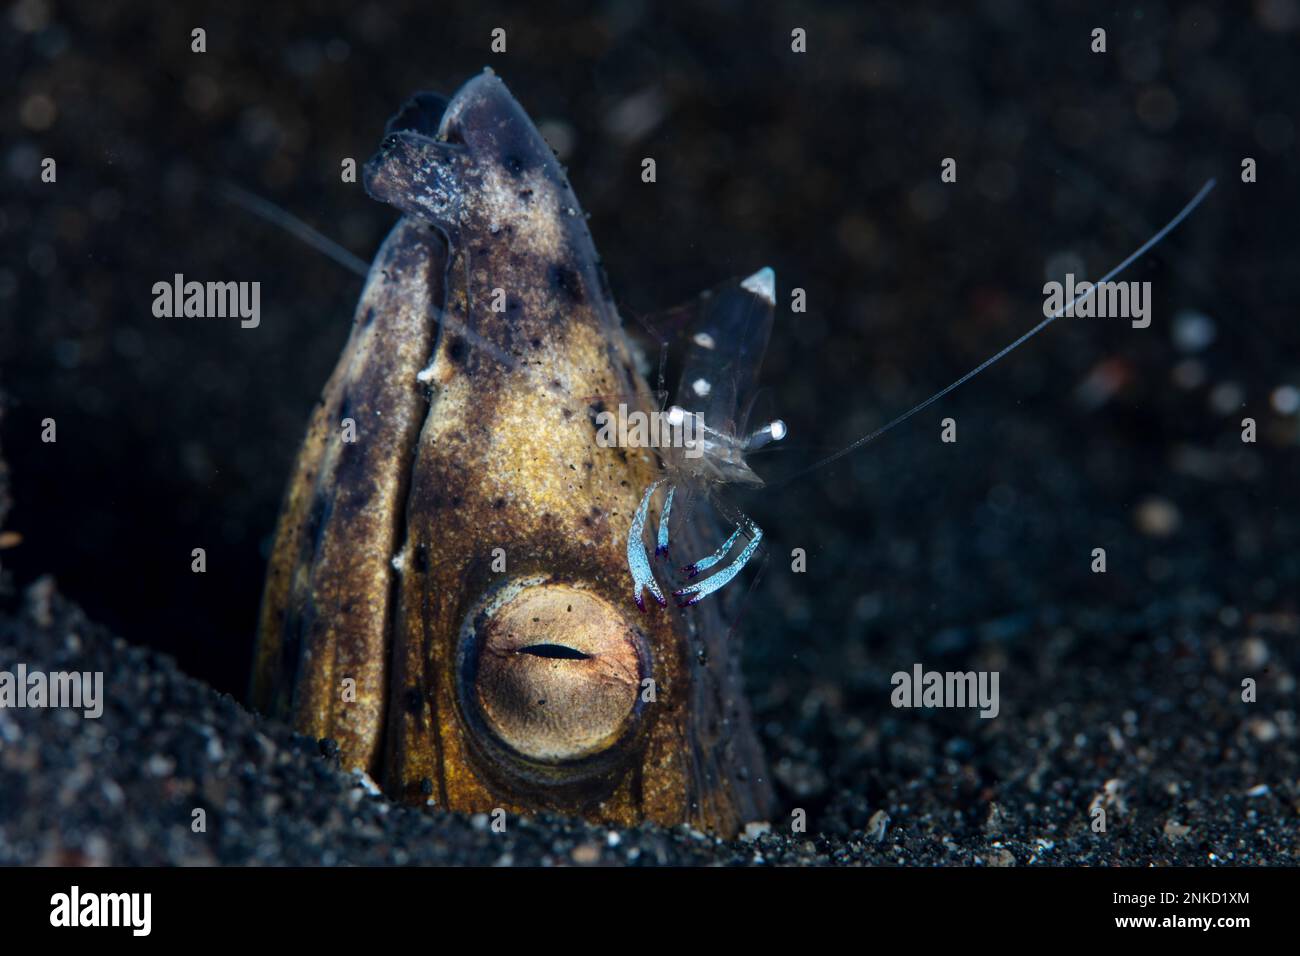 A Blacksaddle snake eel, Ophichthus cephalozona, pokes its head out of the sand in Lembeh Strait, Indonesia, as a shrimp cleans parasites from the eel. Stock Photo